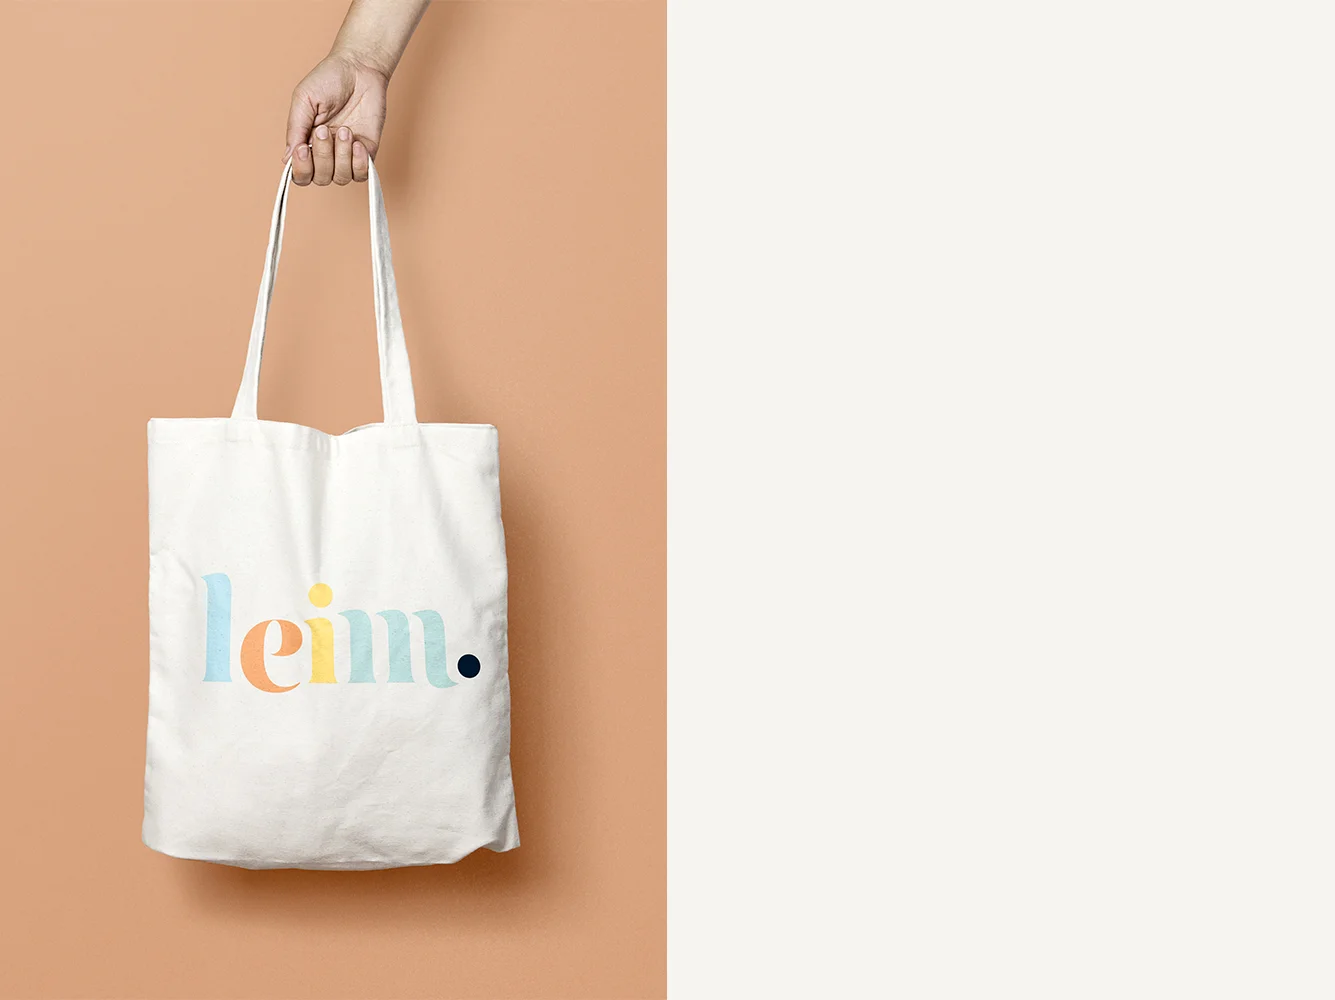 the Leim logo designed by Petitspapiers on a natural undyed tote bag